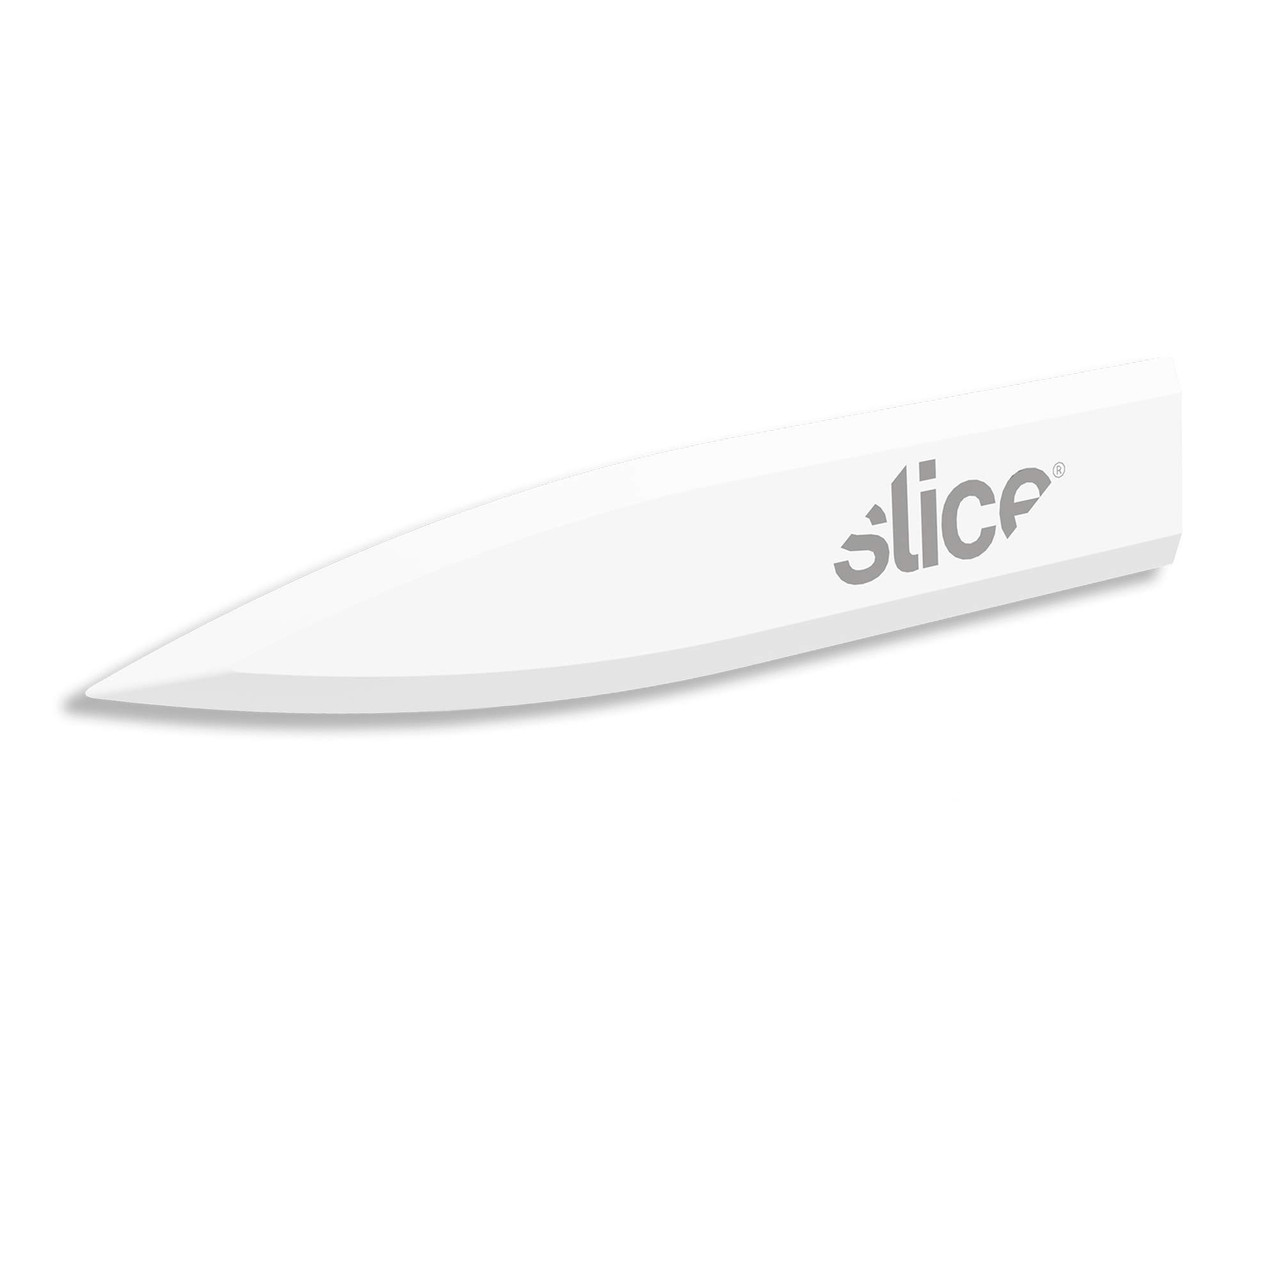 Slice Squeeze Knife Box Cutter, Ceramic Blade, Finger Friendly Lasts 11X  (10493)